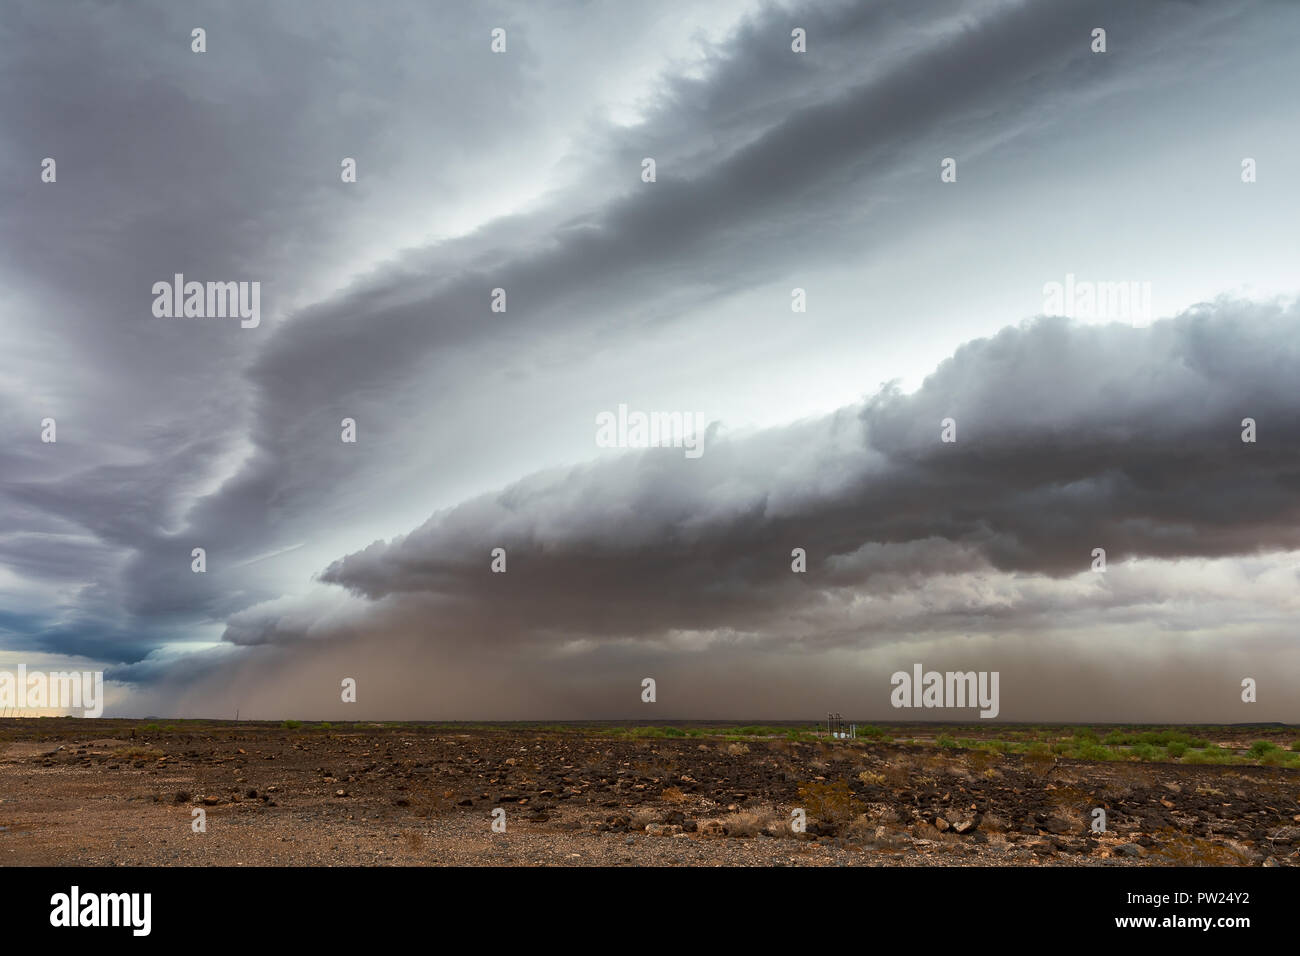 Shelf cloud and dust storm ahead of a line of thunderstorms in the Arizona desert Stock Photo